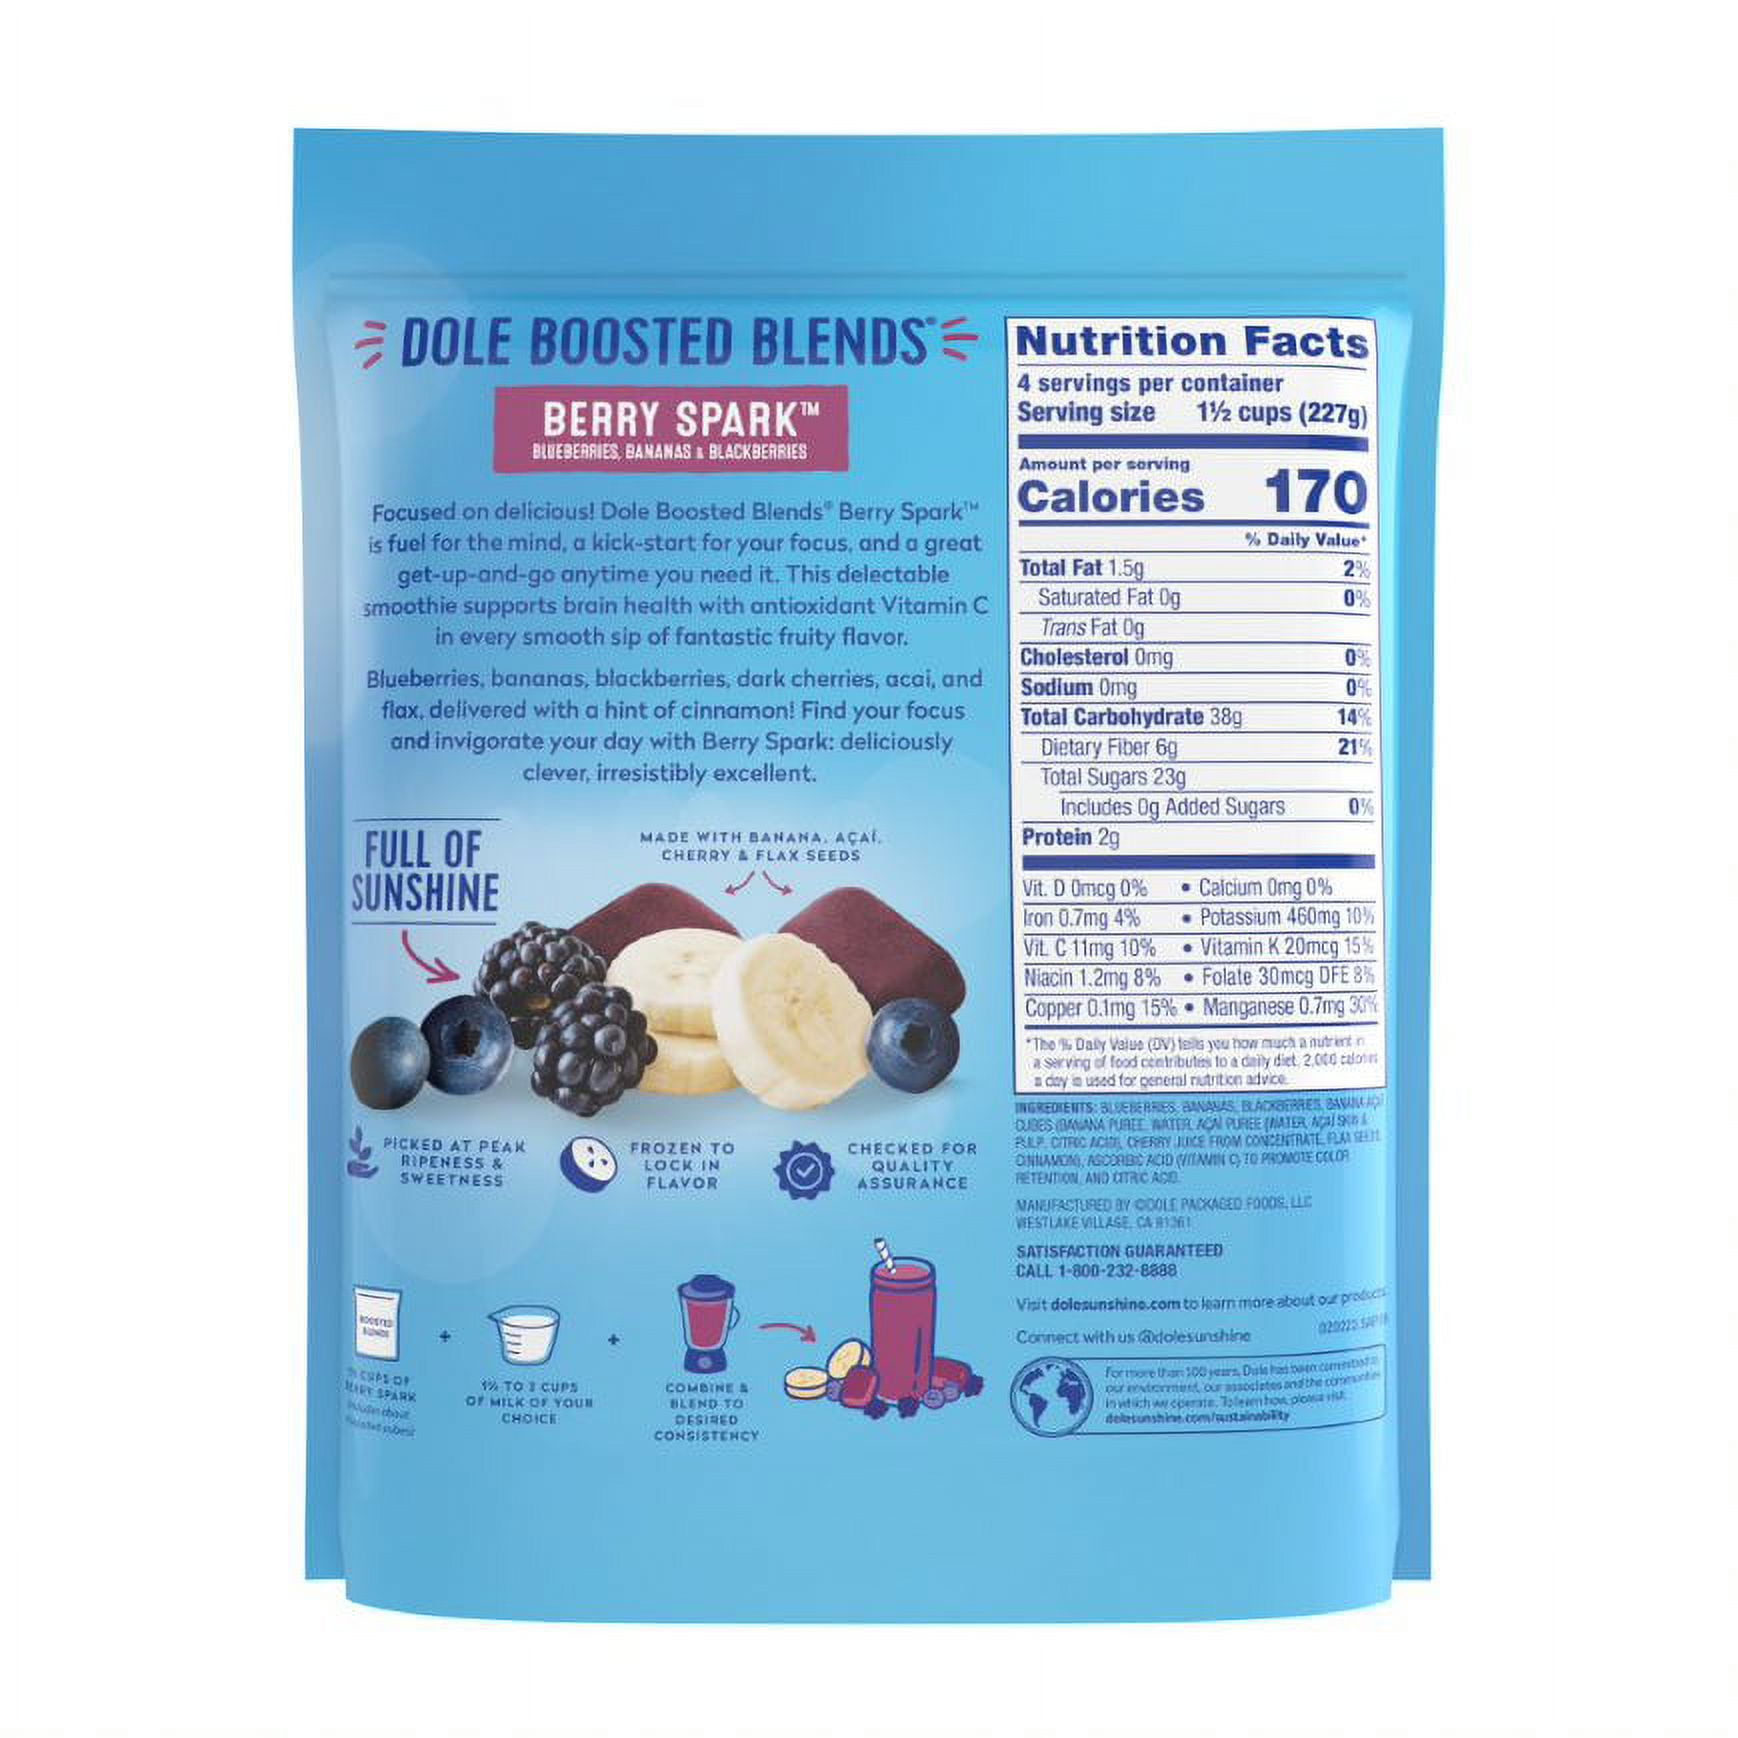 Dole® Boosted Blends® Protein: Blueberry Banana Smoothie Mix - Dole®  Sunshine